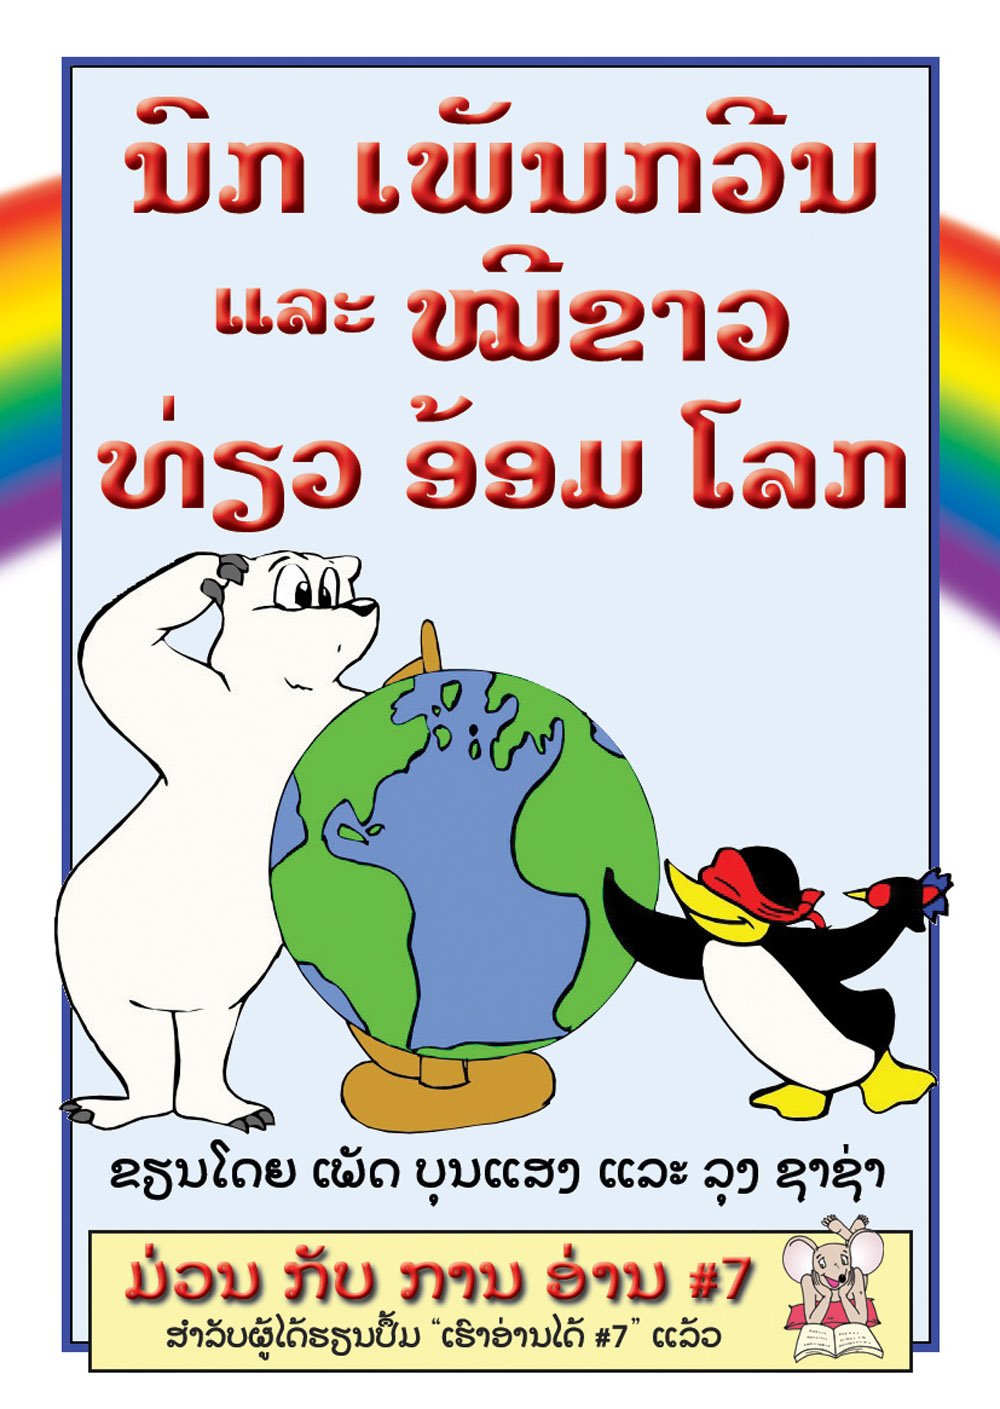 Penguin and Polar Bear Travel the World large book cover, published in Lao language